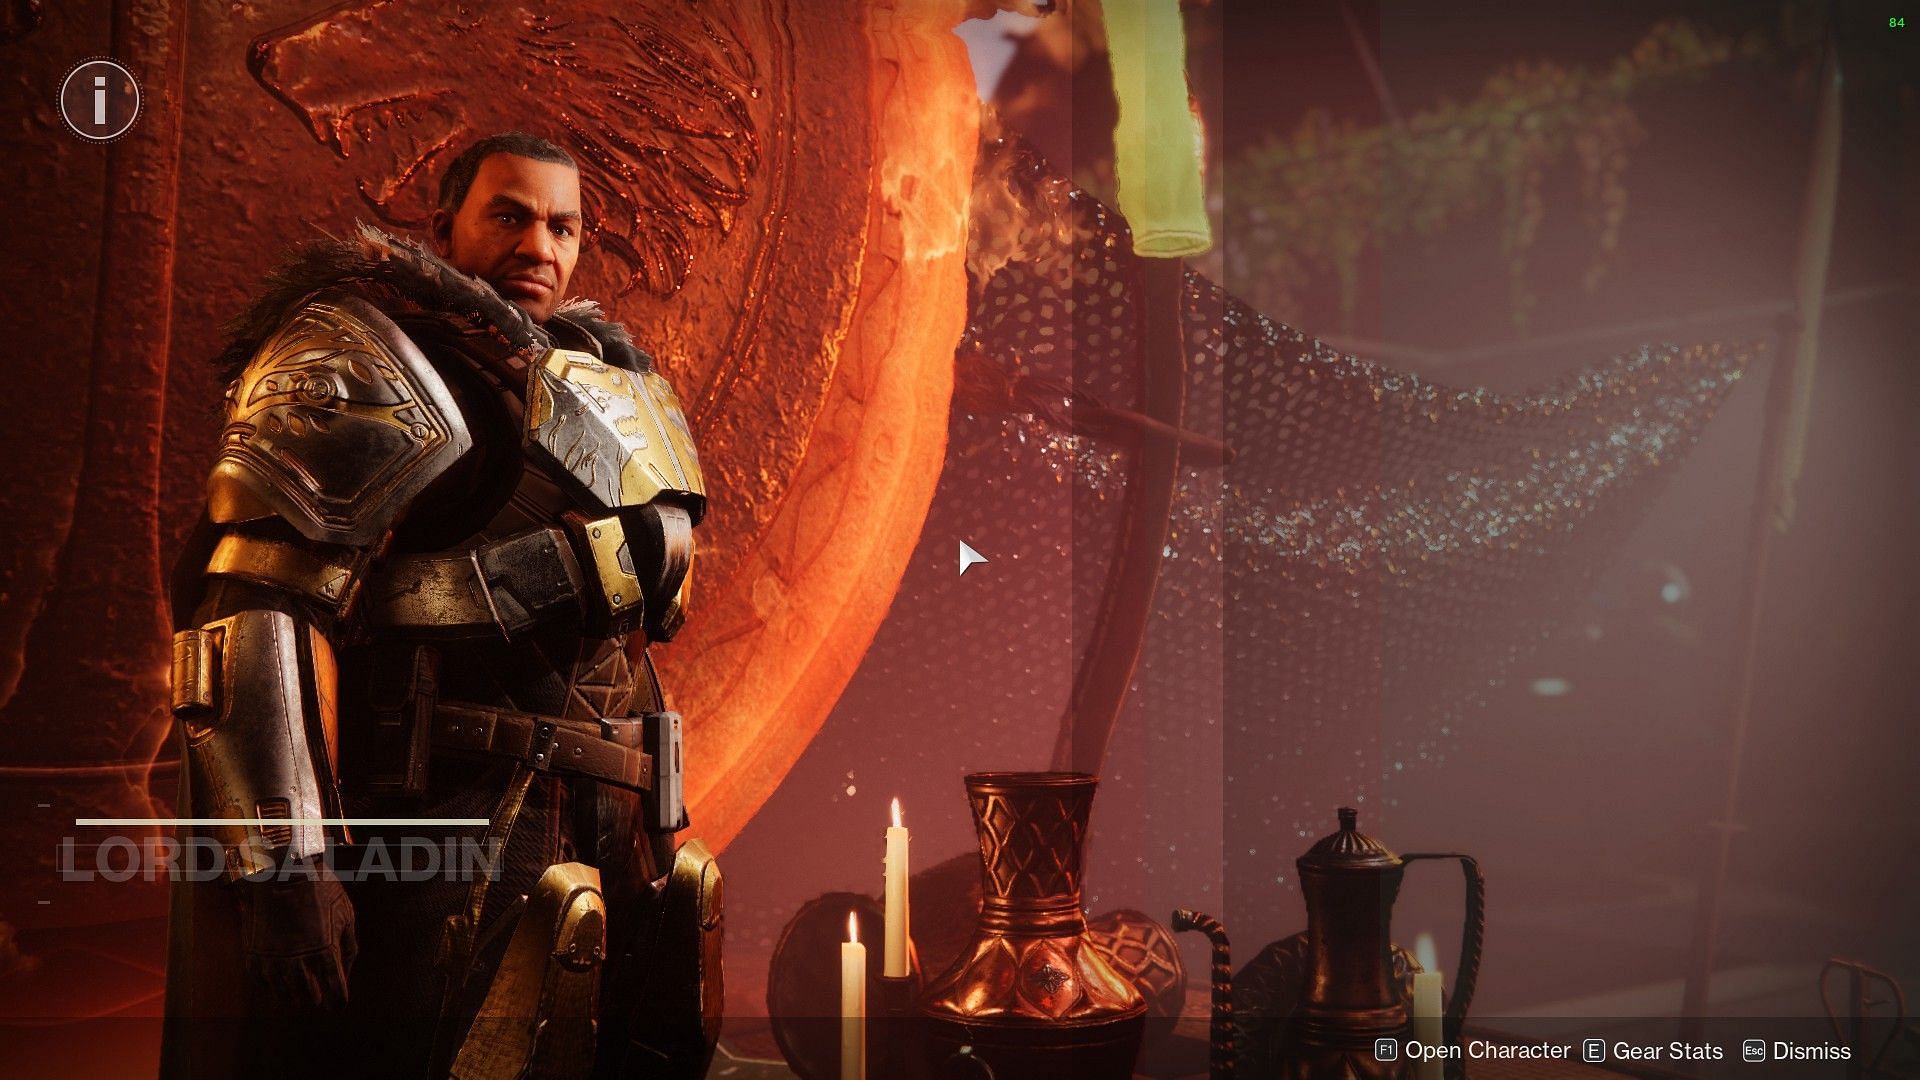 Saladin Forge at the Tower (Image via Bungie) 